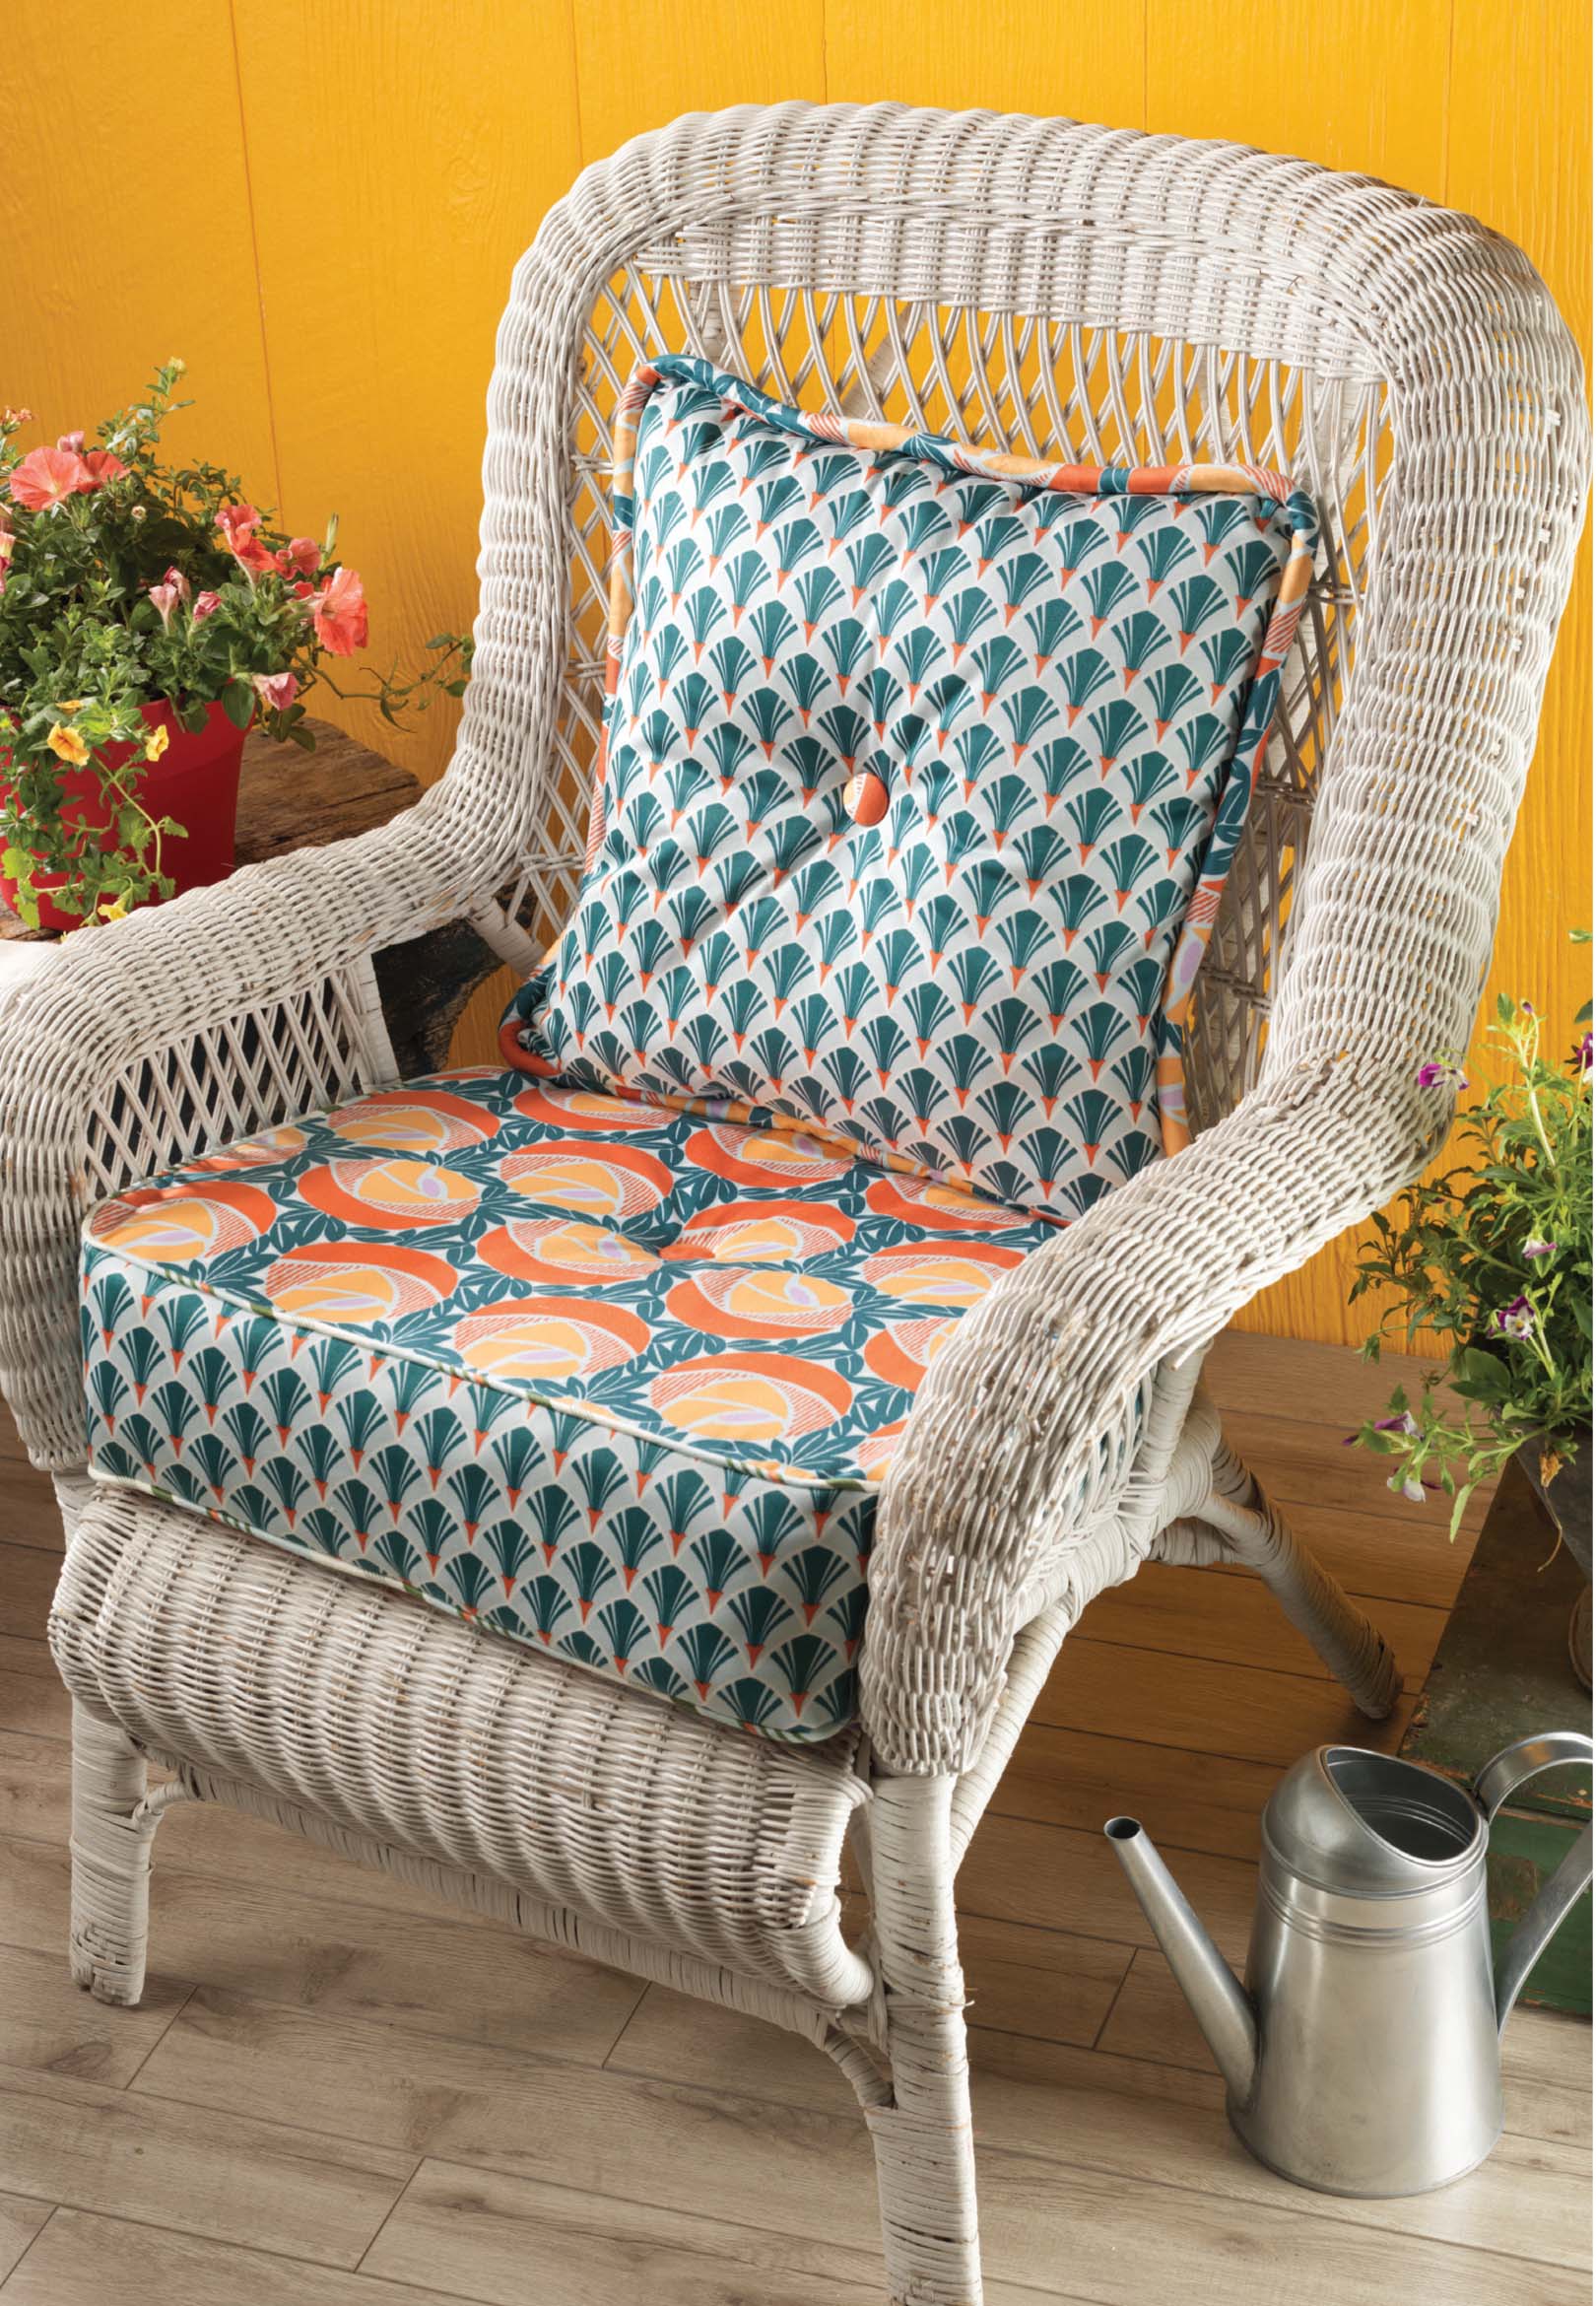 Custom Chair Cushion and Pillow Pattern Download | Sew Daily